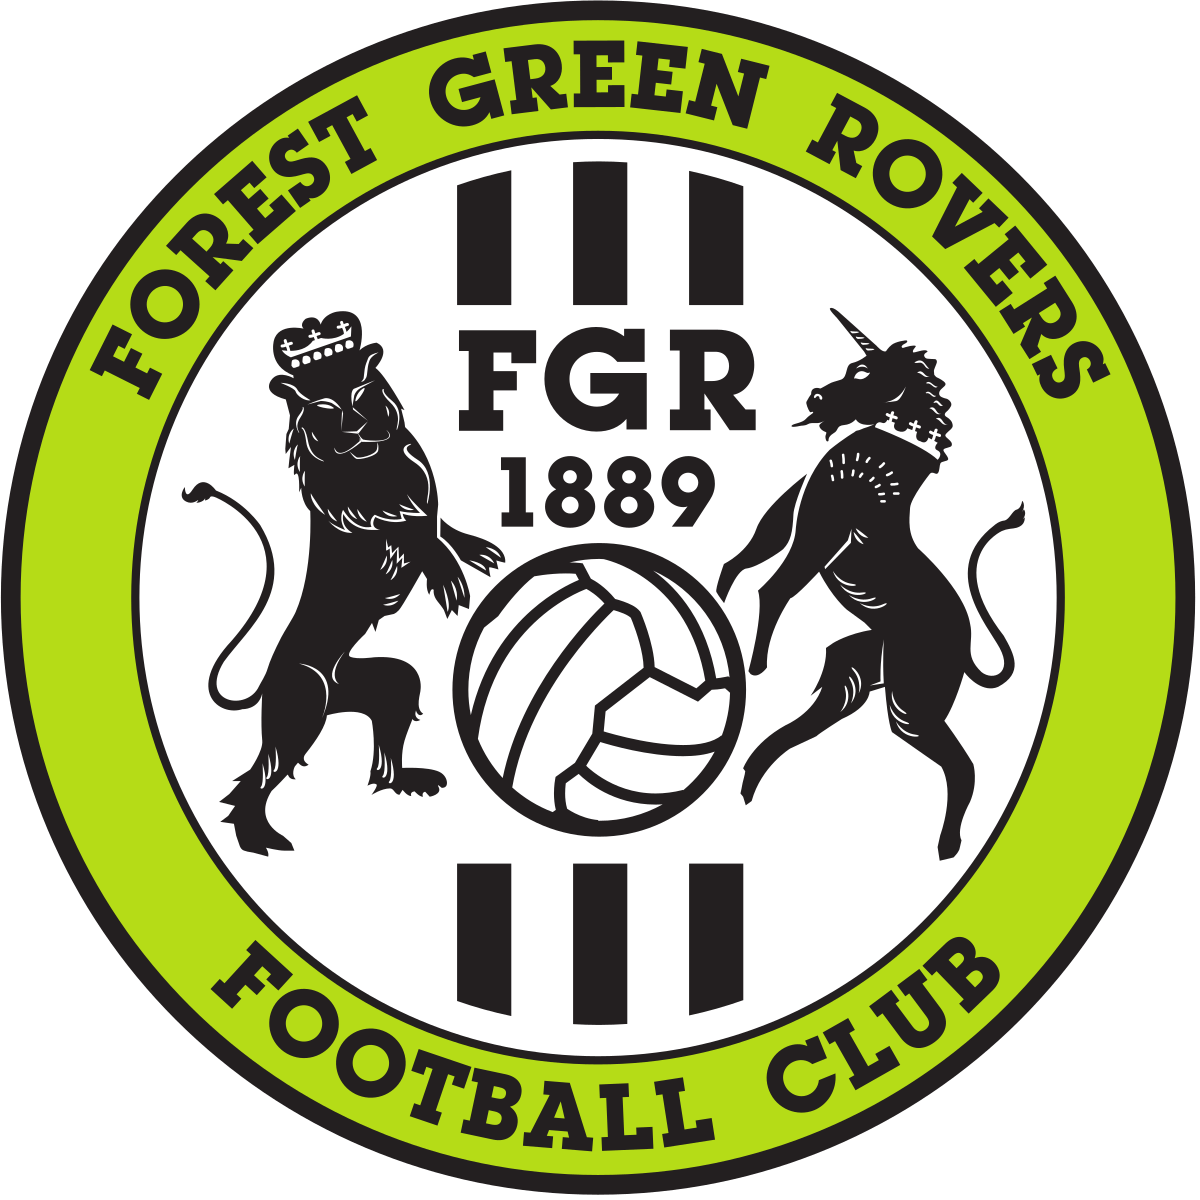 Gray and Green Ball Logo - Forest Green Rovers F.C.